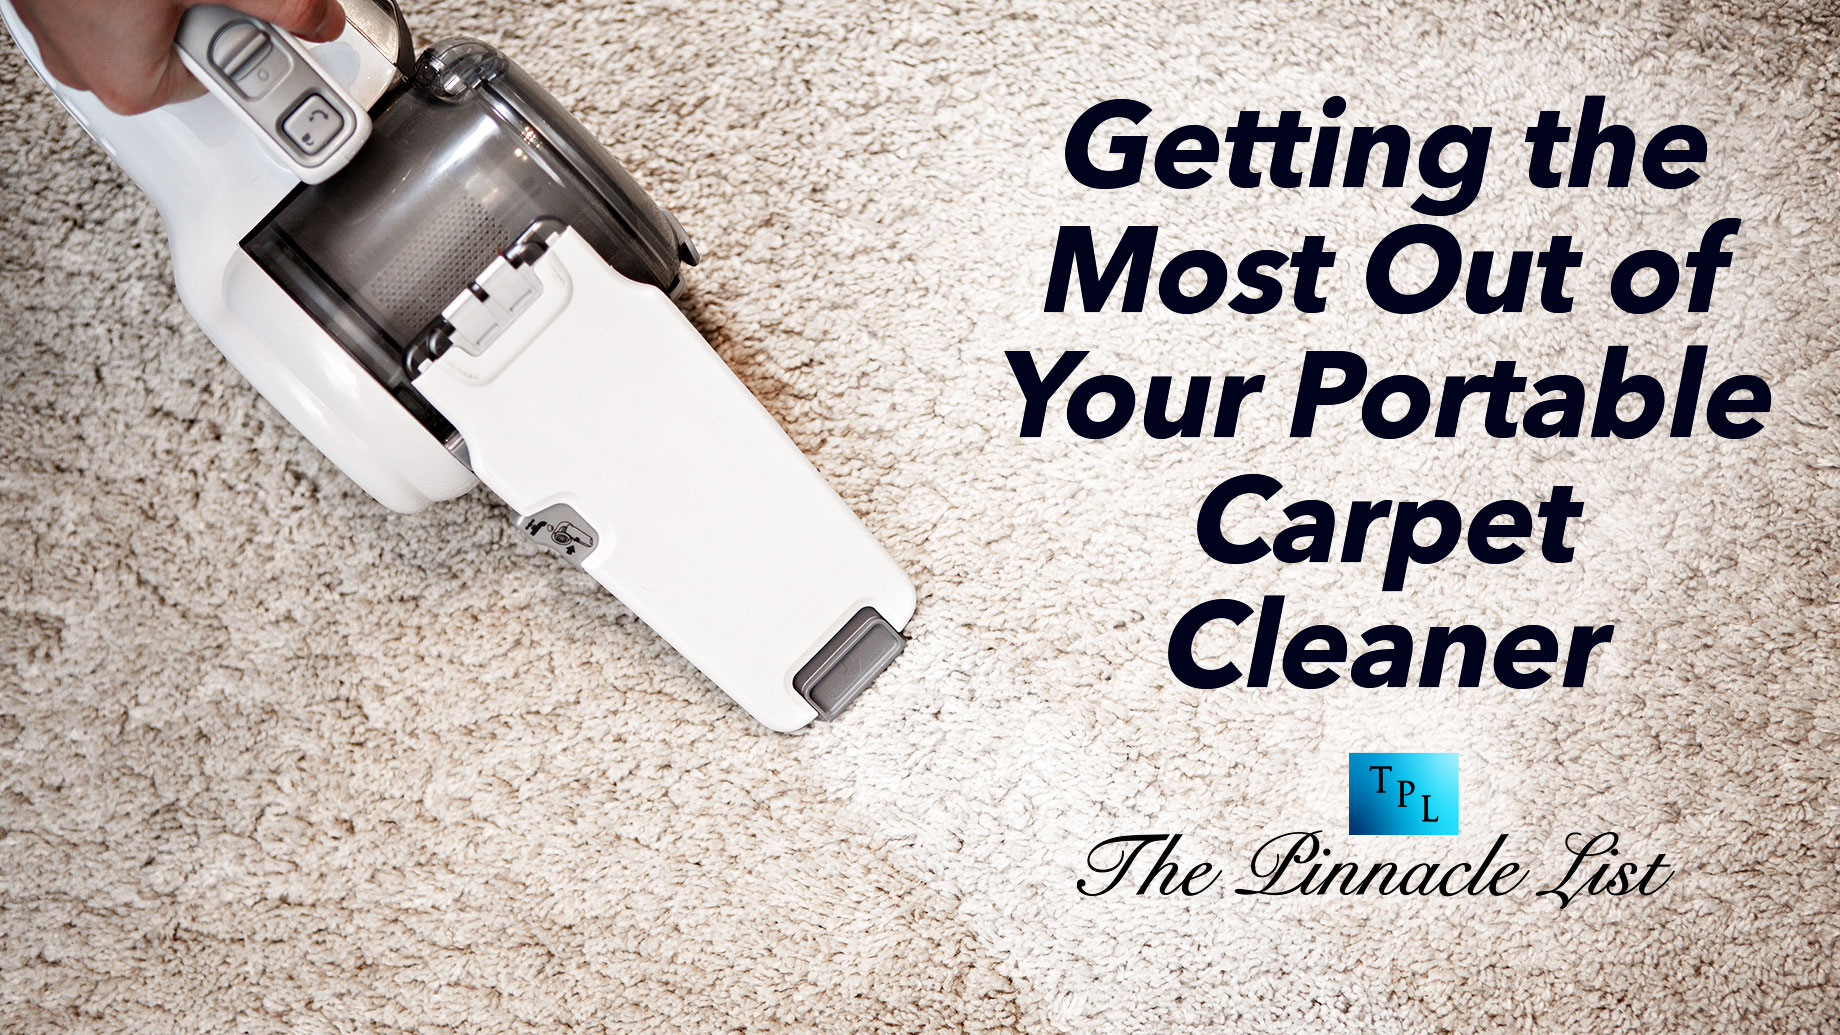 Getting the Most Out of Your Portable Carpet Cleaner